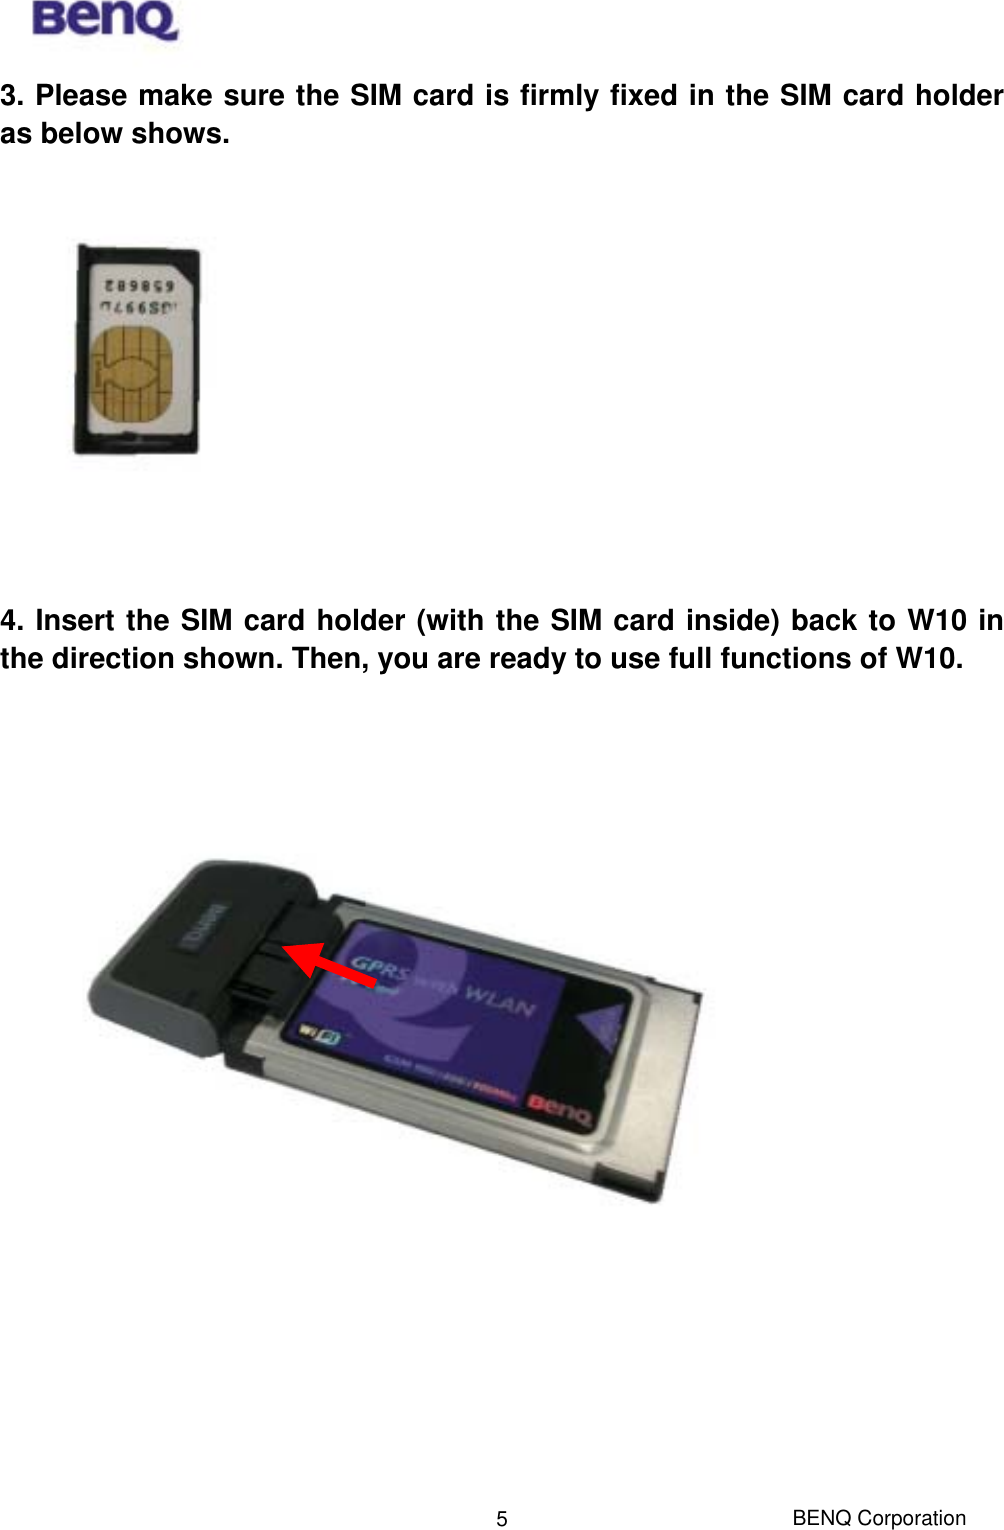  BENQ Corporation 53. Please make sure the SIM card is firmly fixed in the SIM card holder as below shows.       4. Insert the SIM card holder (with the SIM card inside) back to W10 in the direction shown. Then, you are ready to use full functions of W10.        